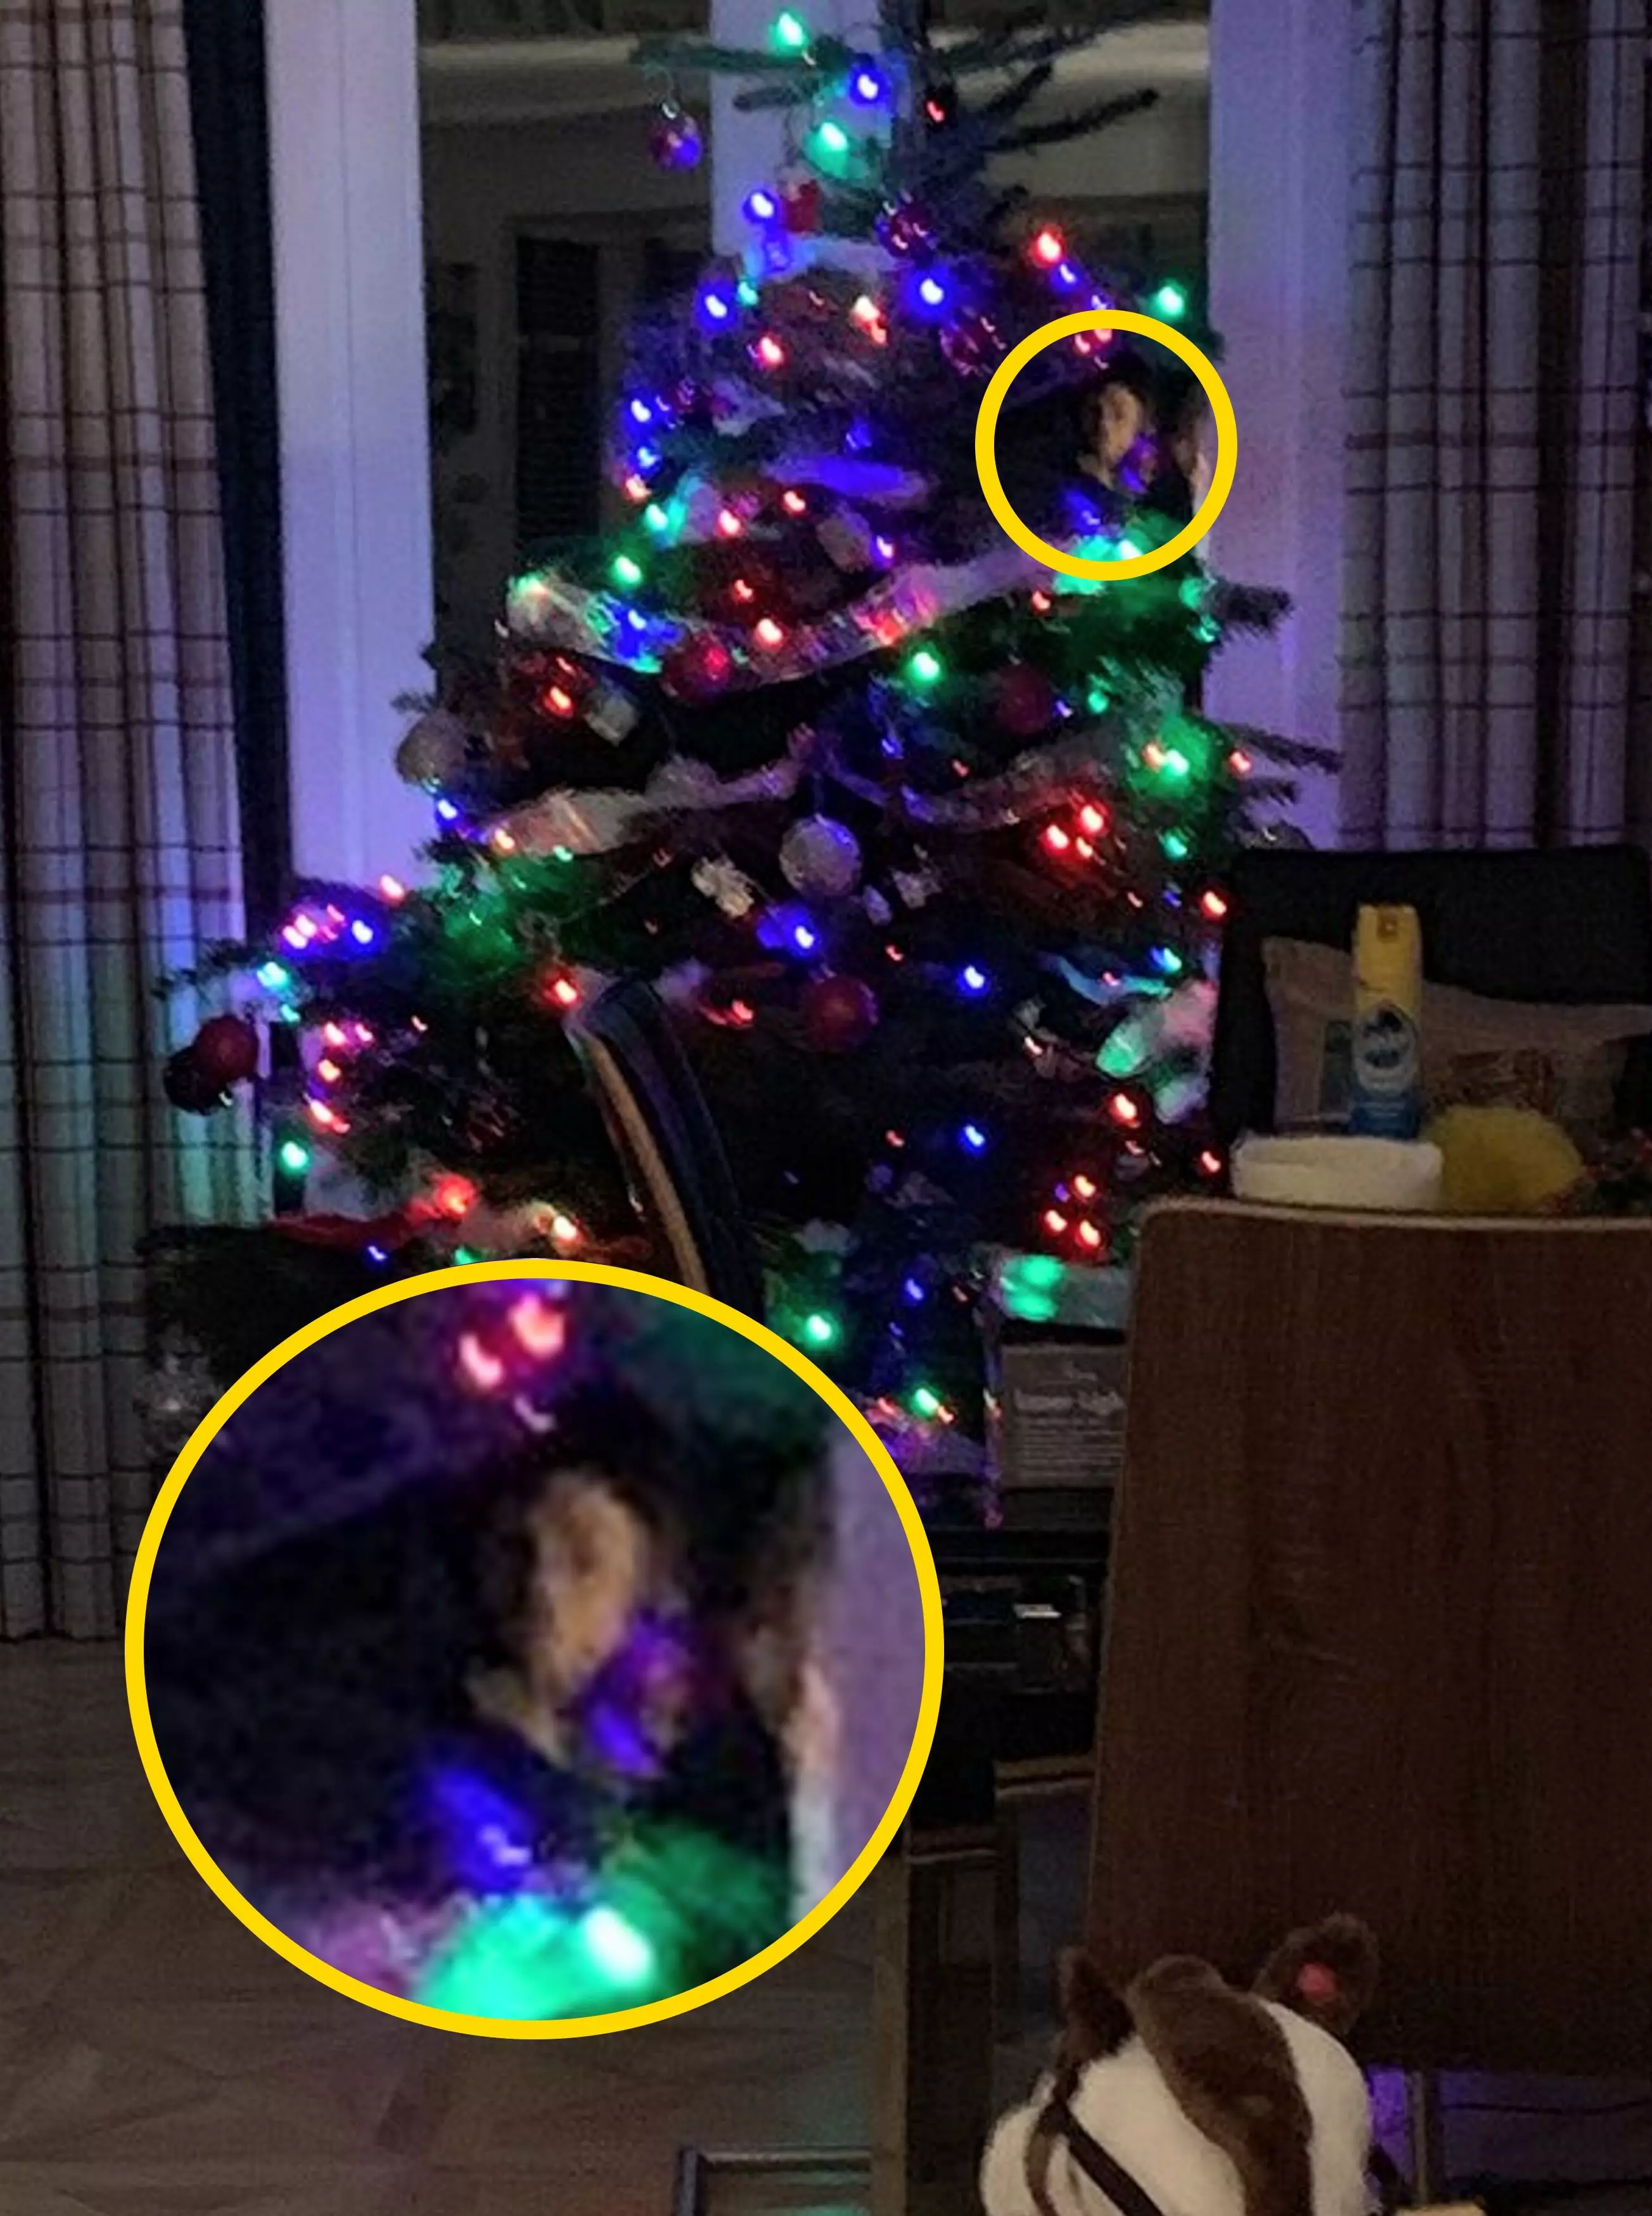 Melanie Scholes claims to have taken a picture of the Christmas tree when she noticed there was a face gazing right back at her.